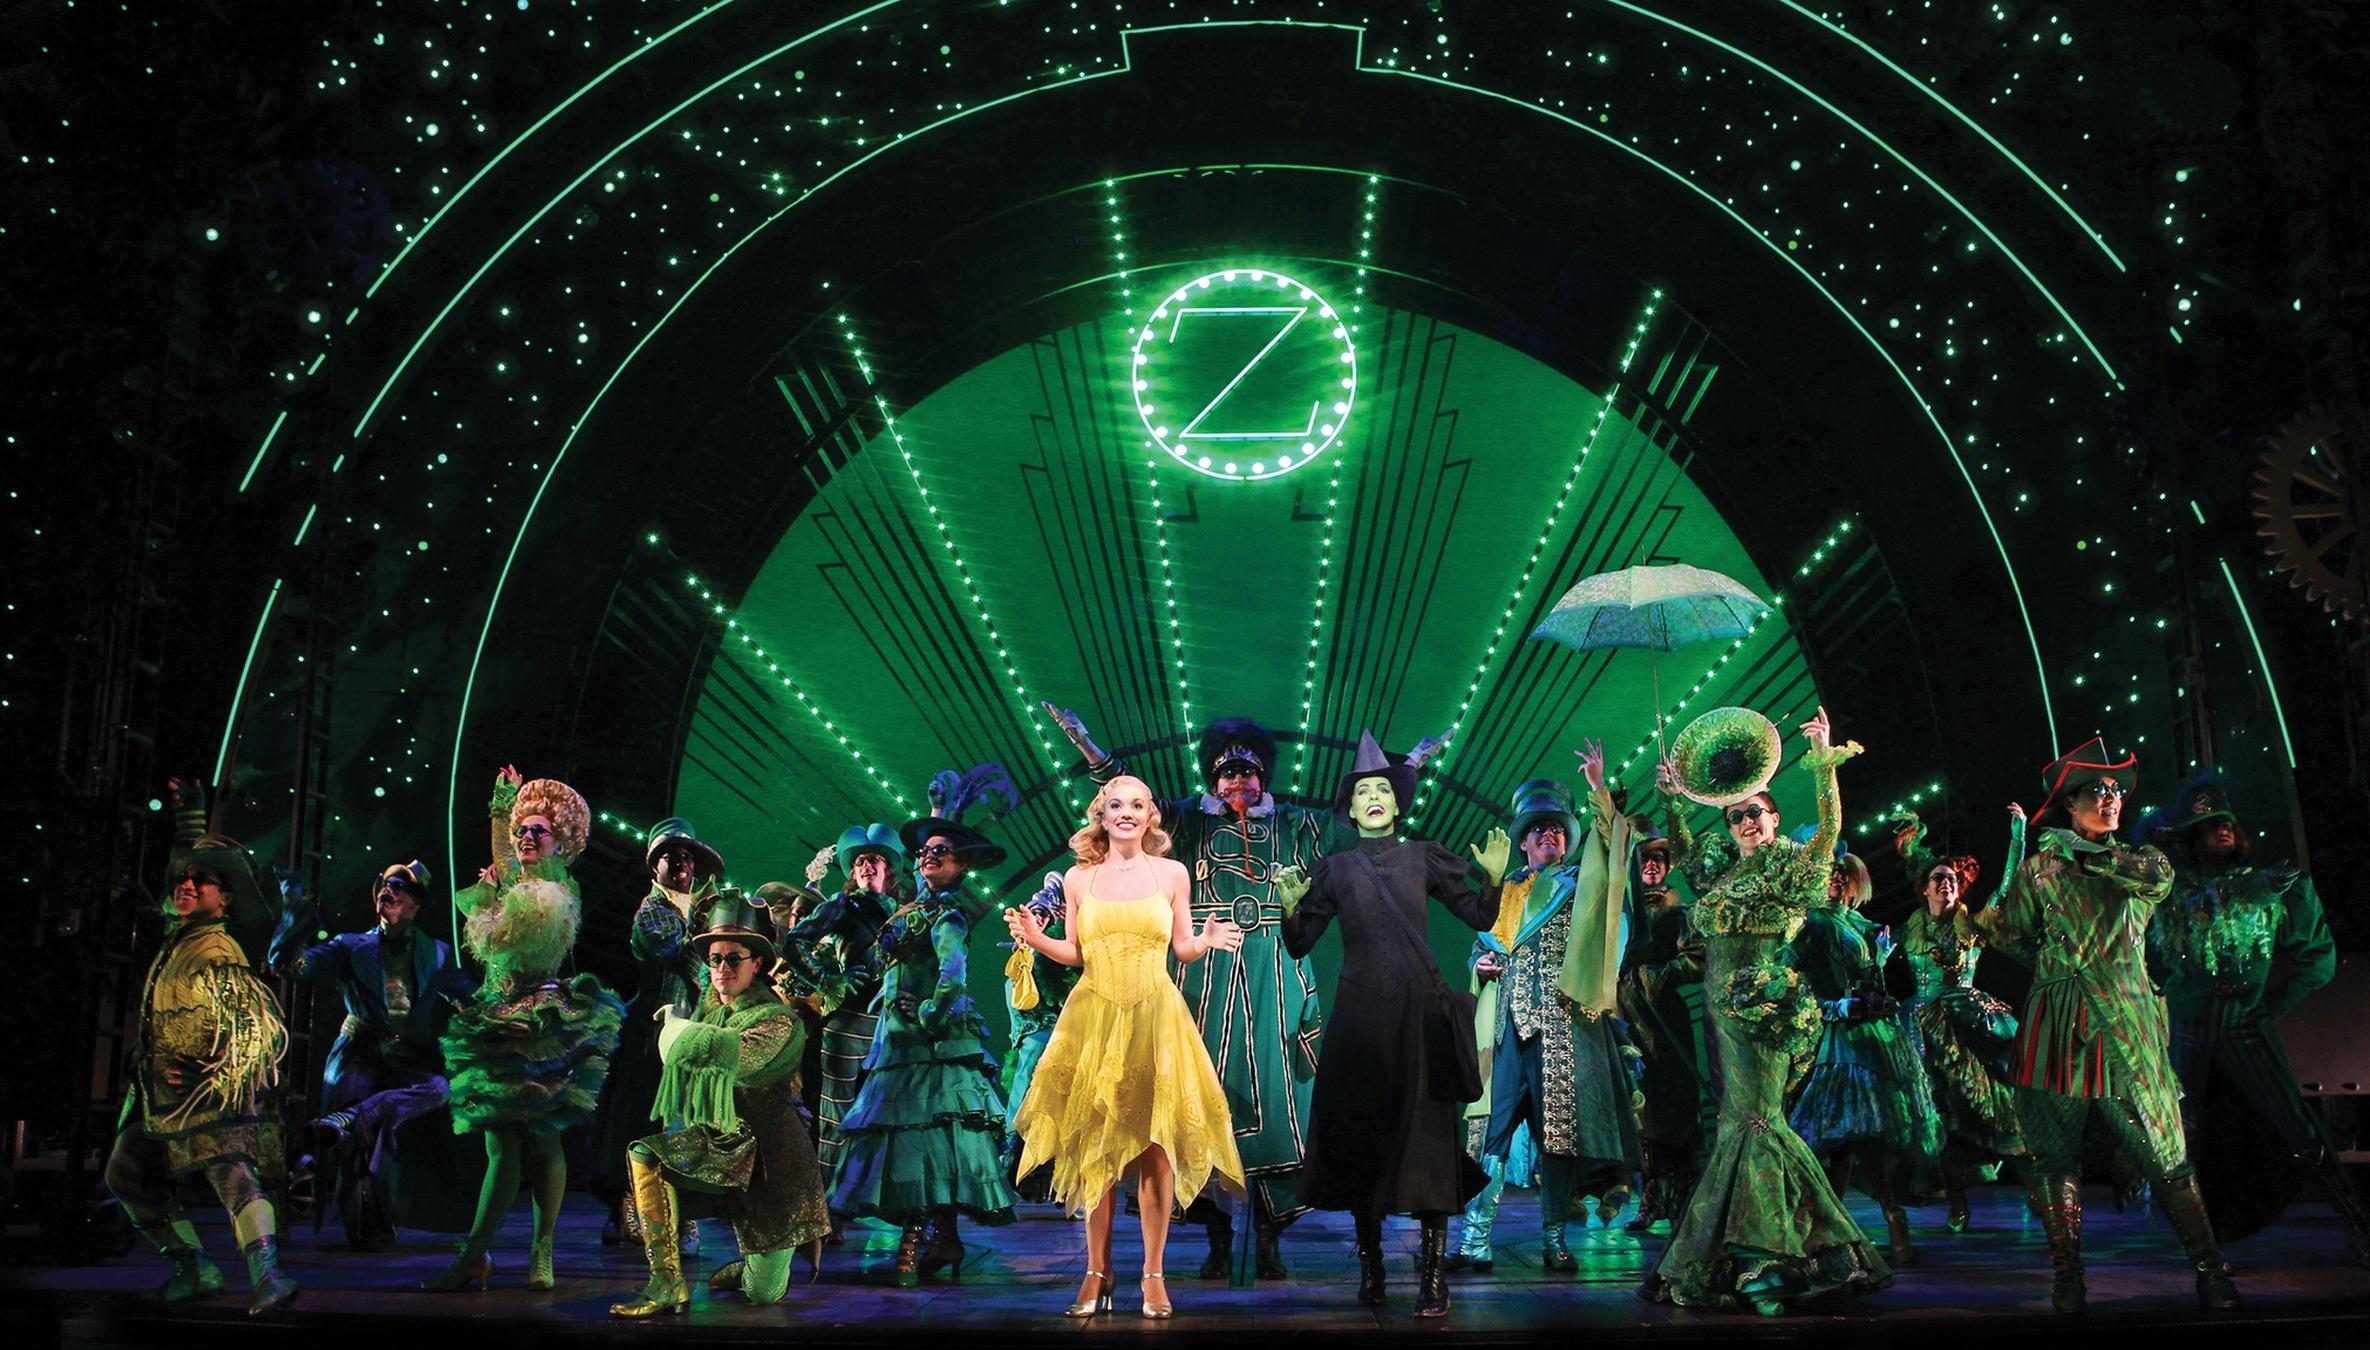 wicked in tour